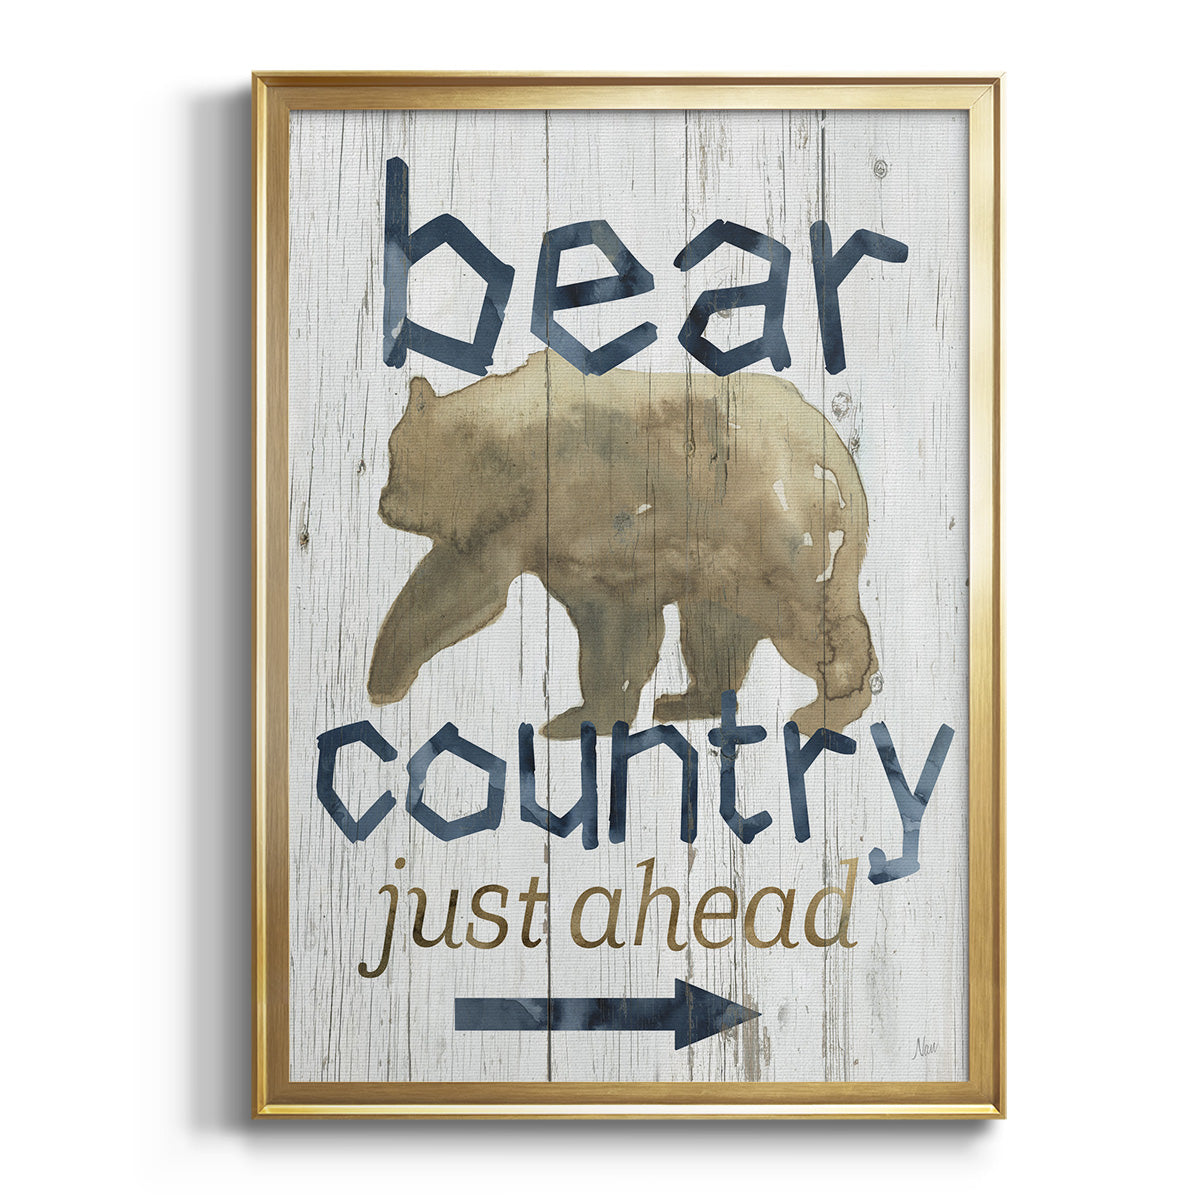 Bear Country Premium Framed Print - Ready to Hang